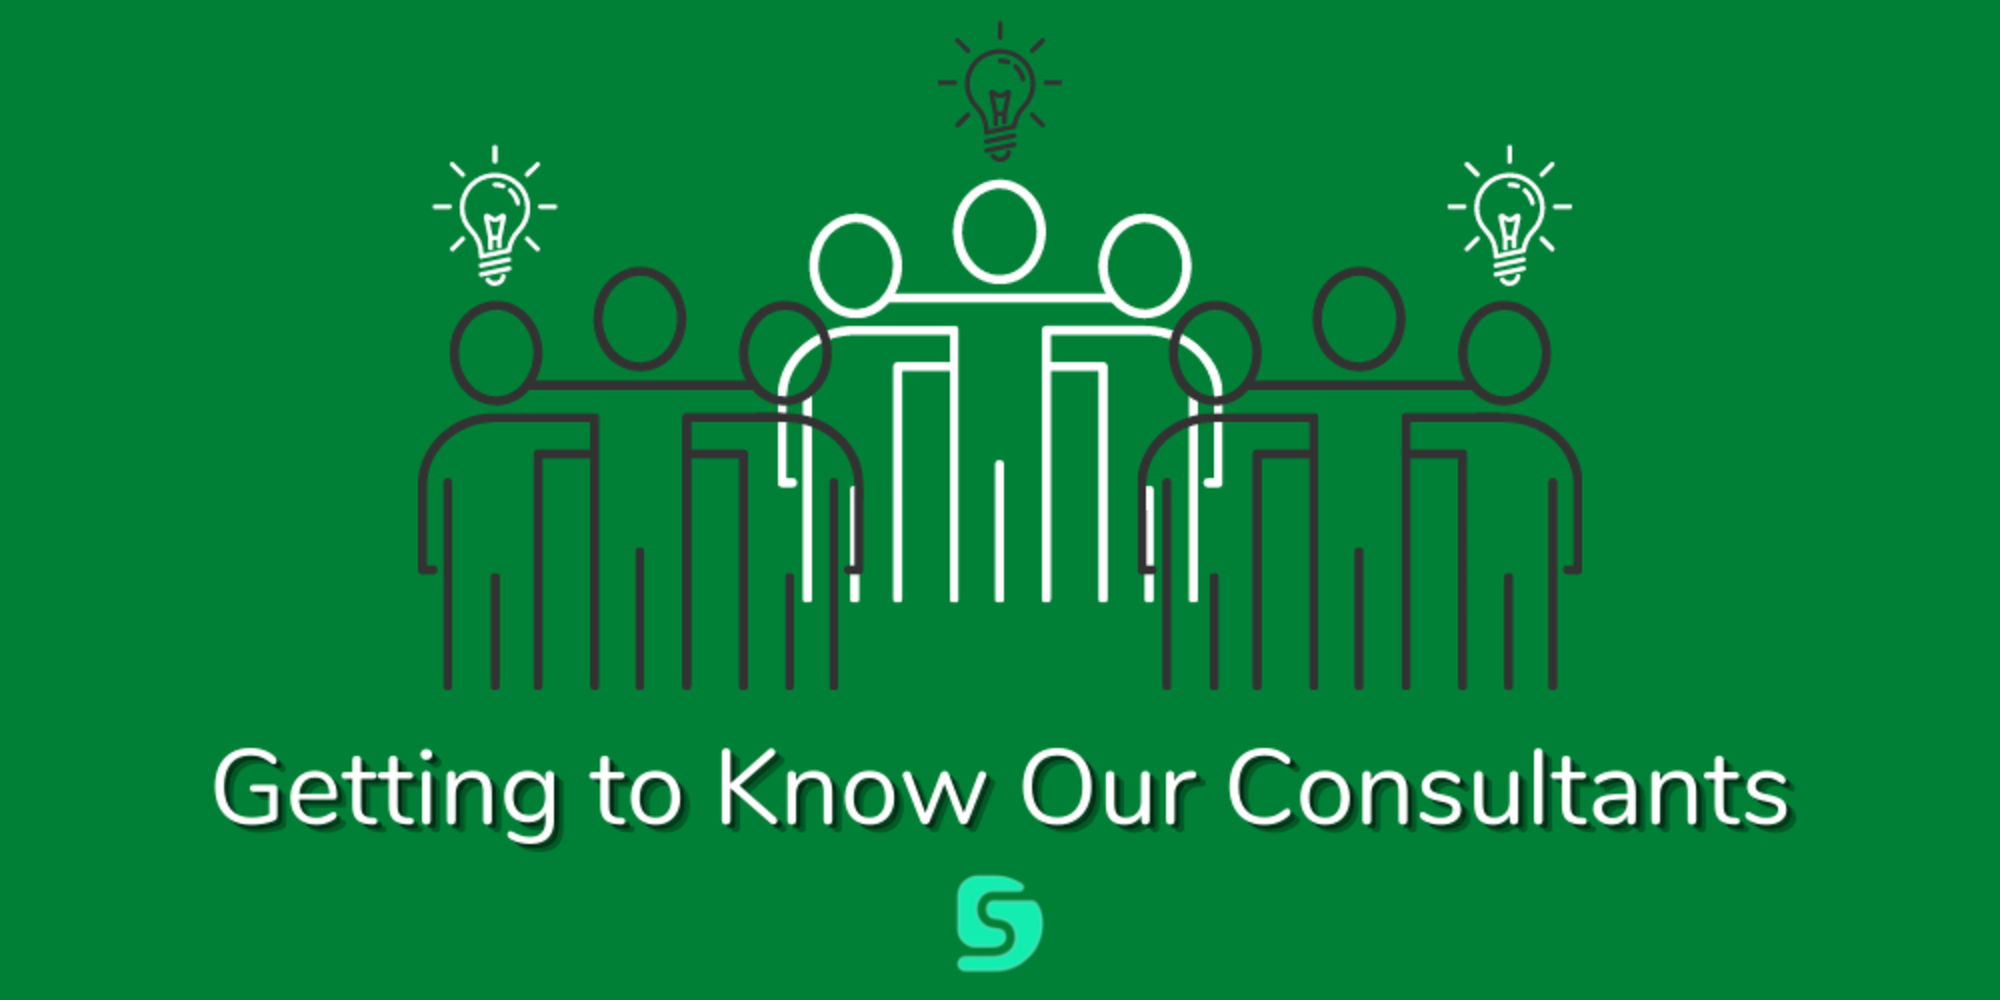 Getting To Know Our Consultants   10 Questions Over 10 Weeks (4)